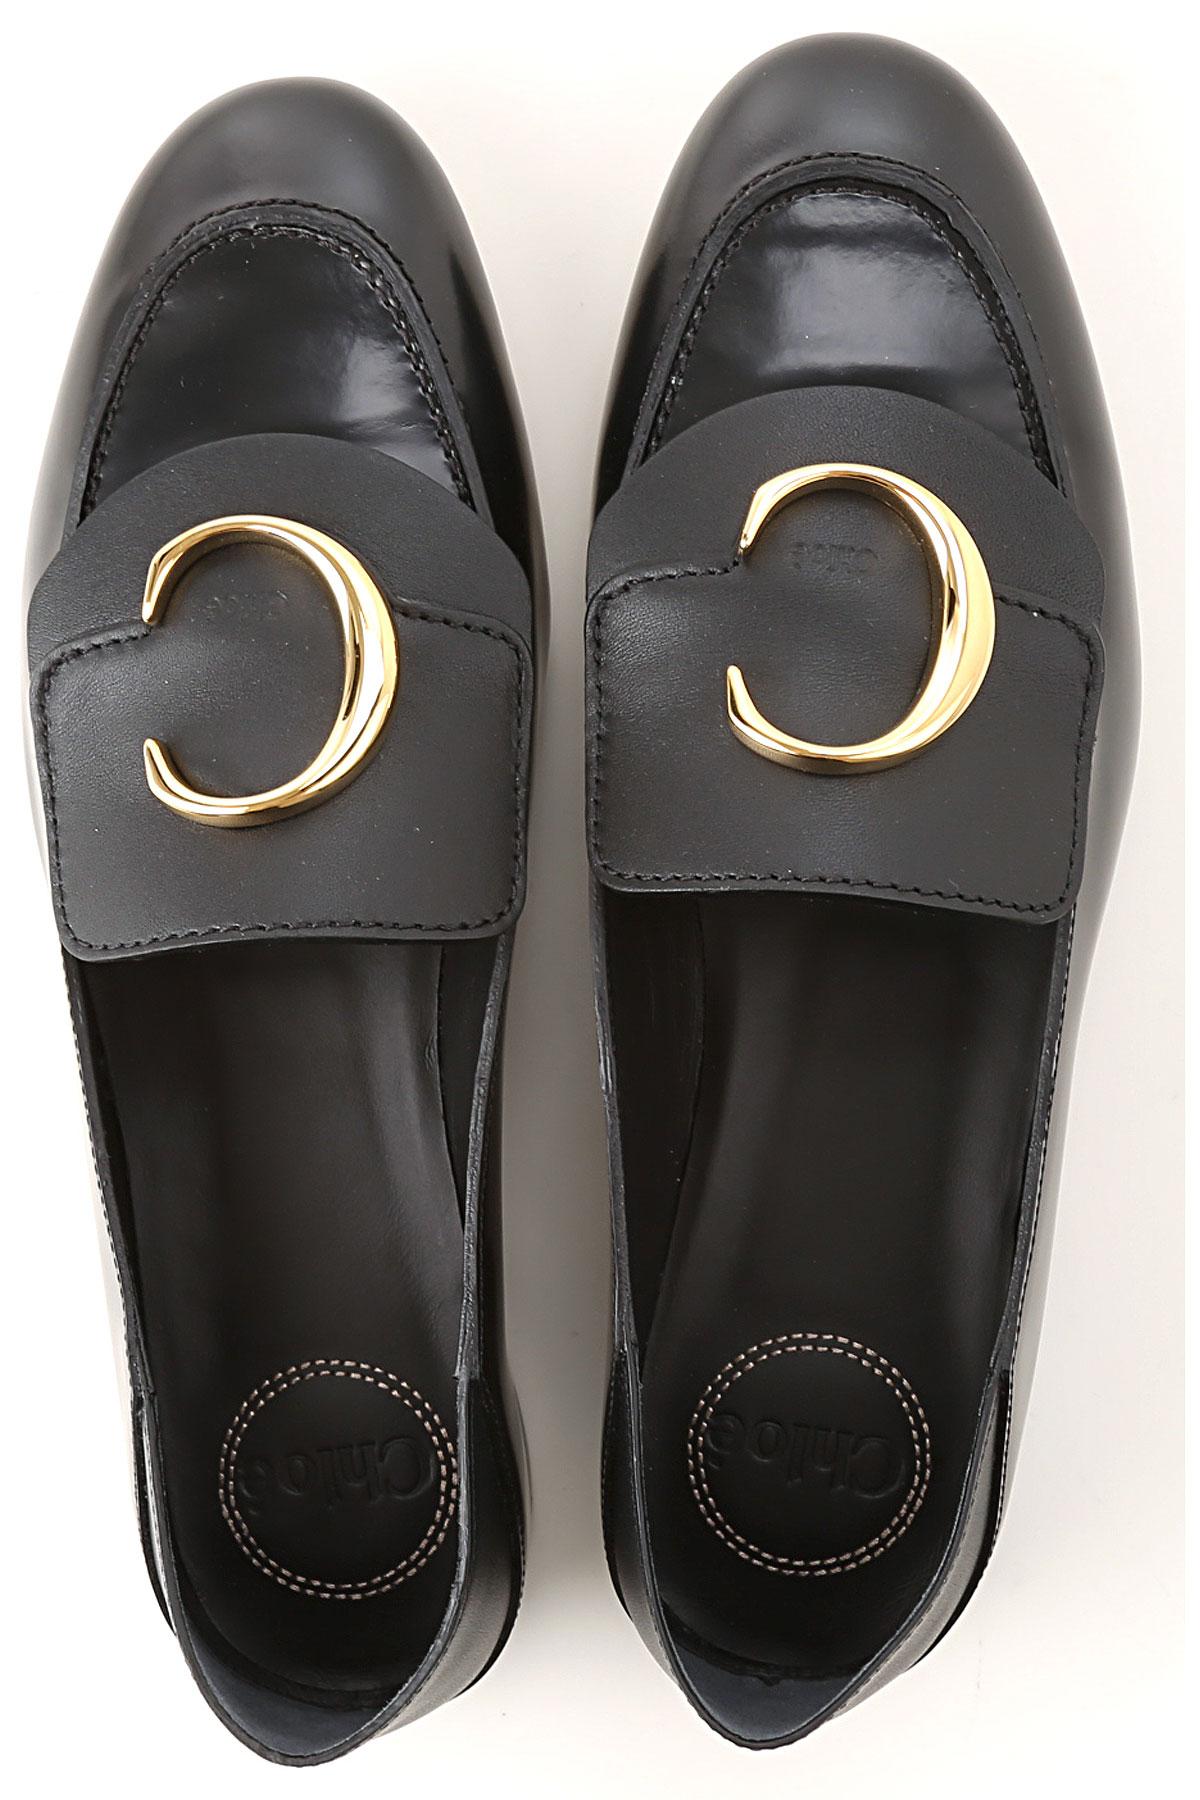 Chloé Loafers For Women On Sale in 